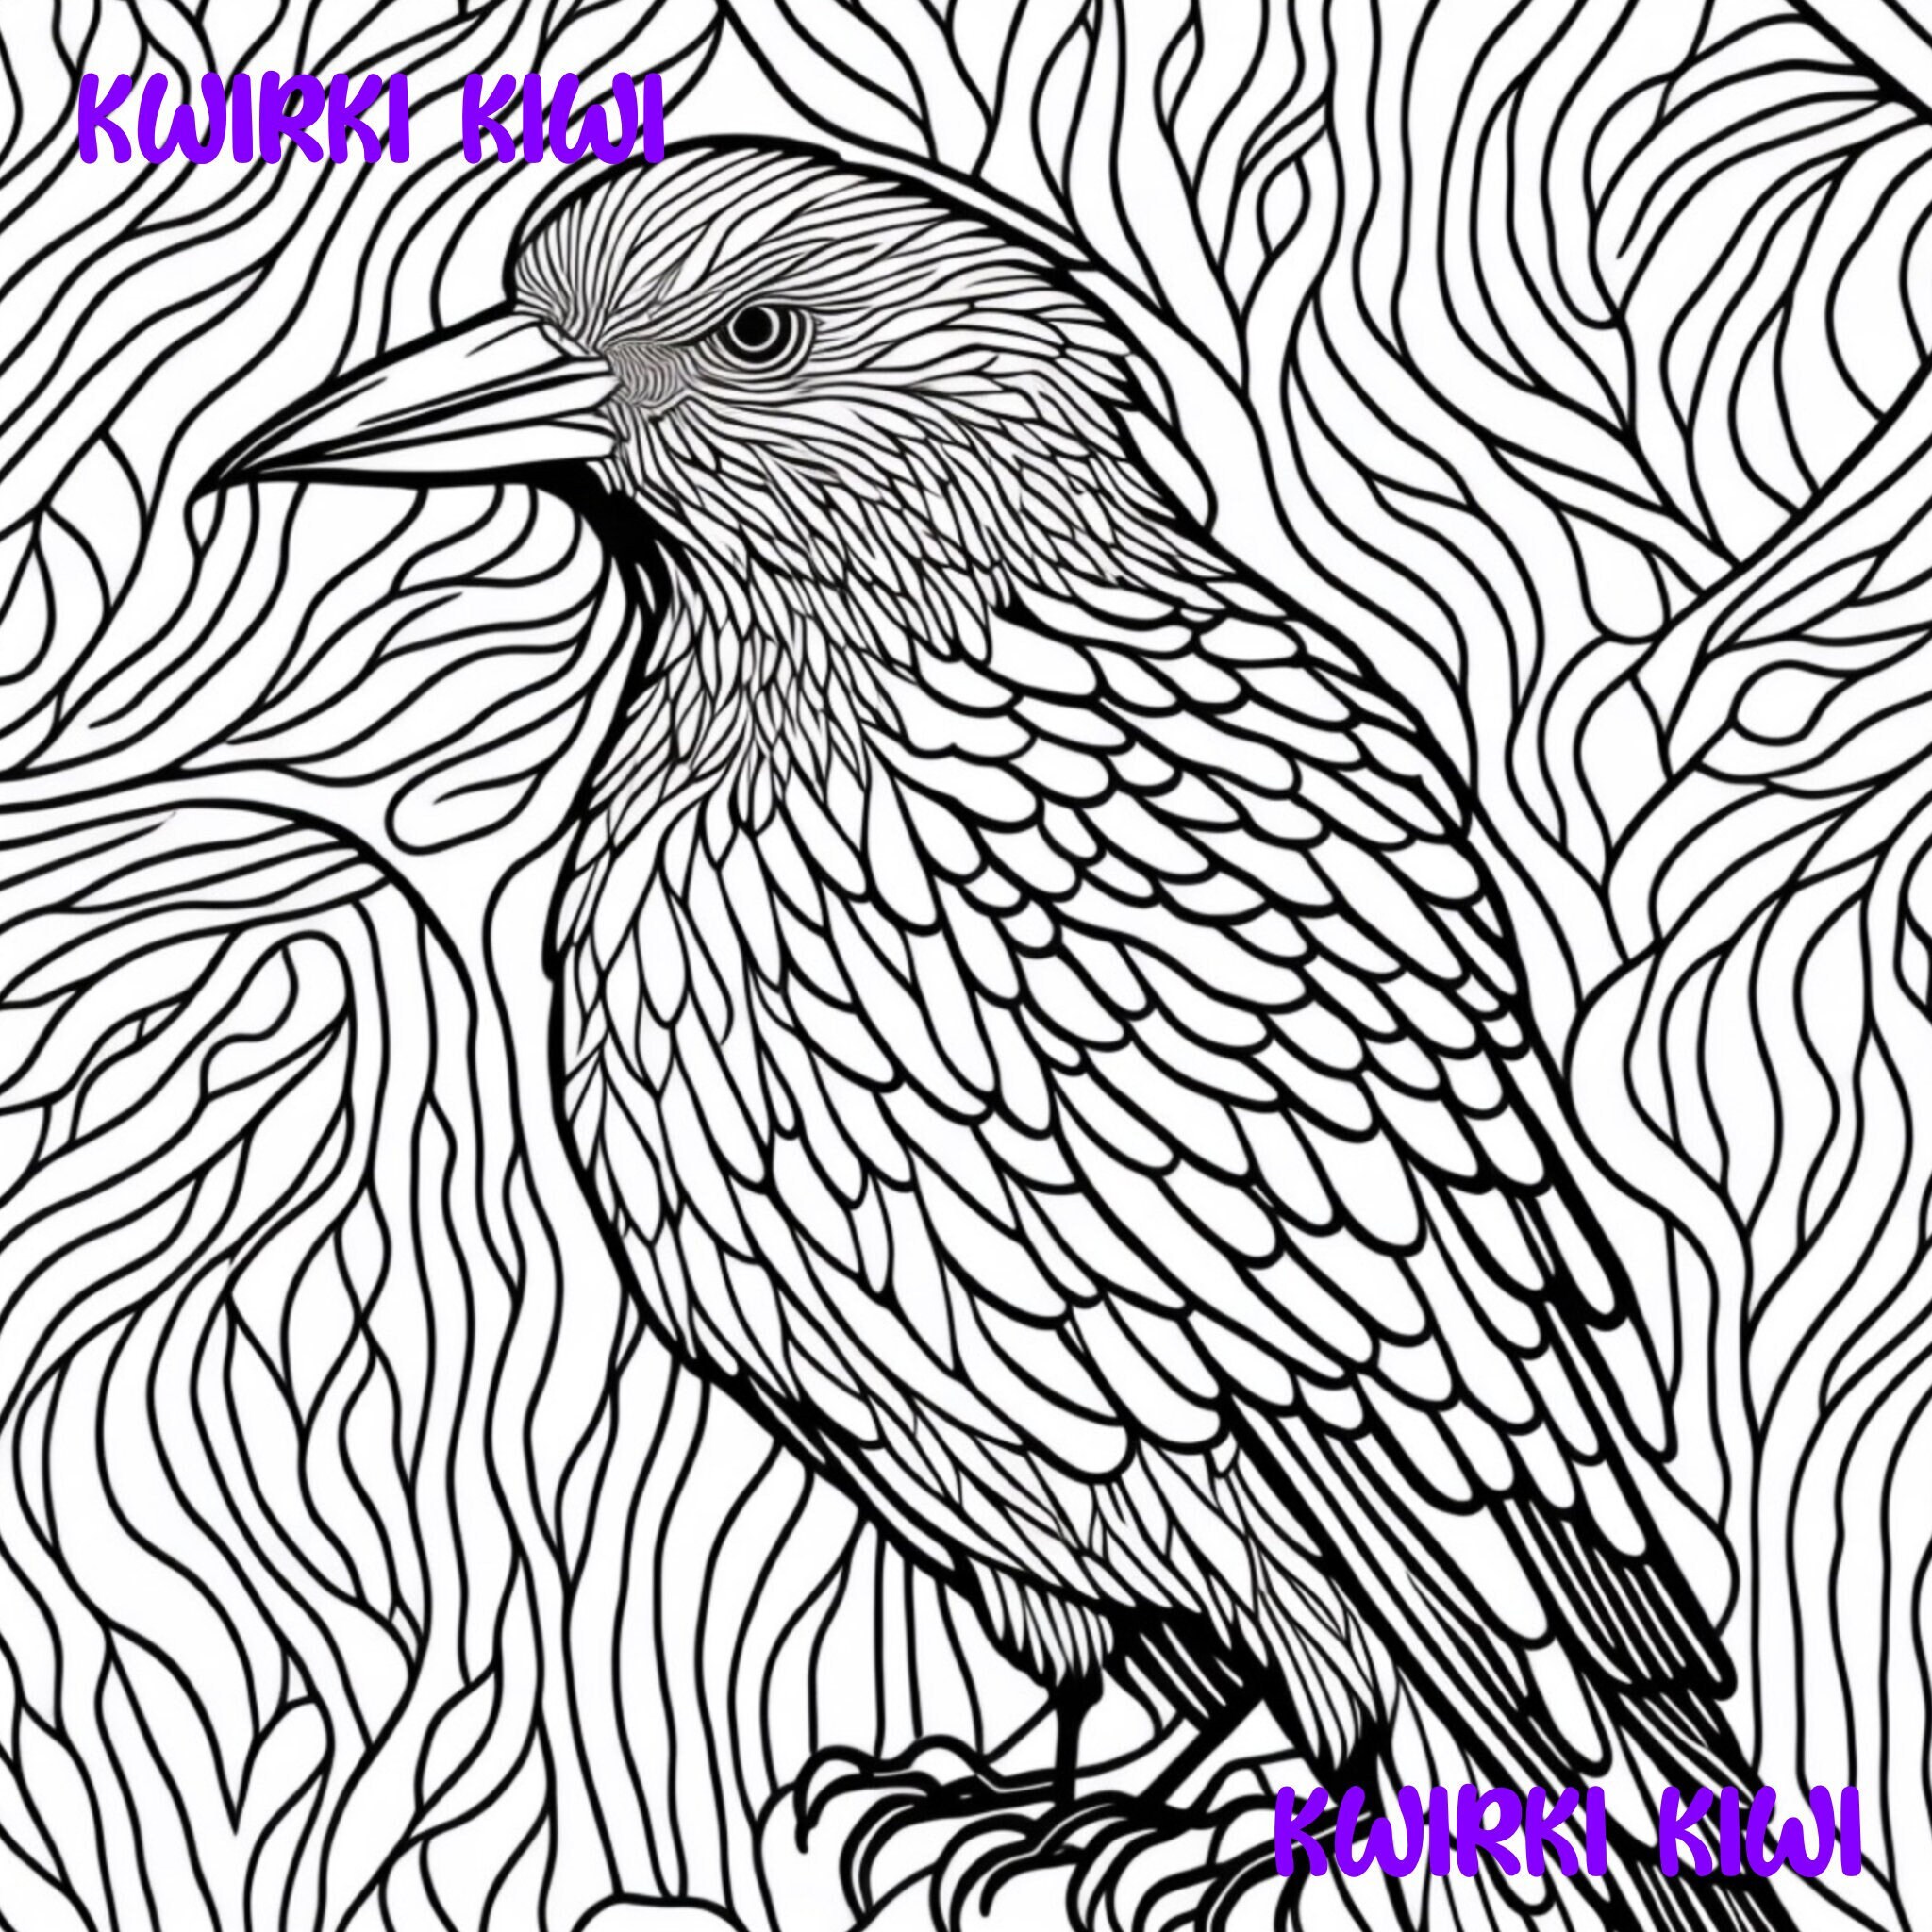 Raven crow bird relaxing adult coloring page digital